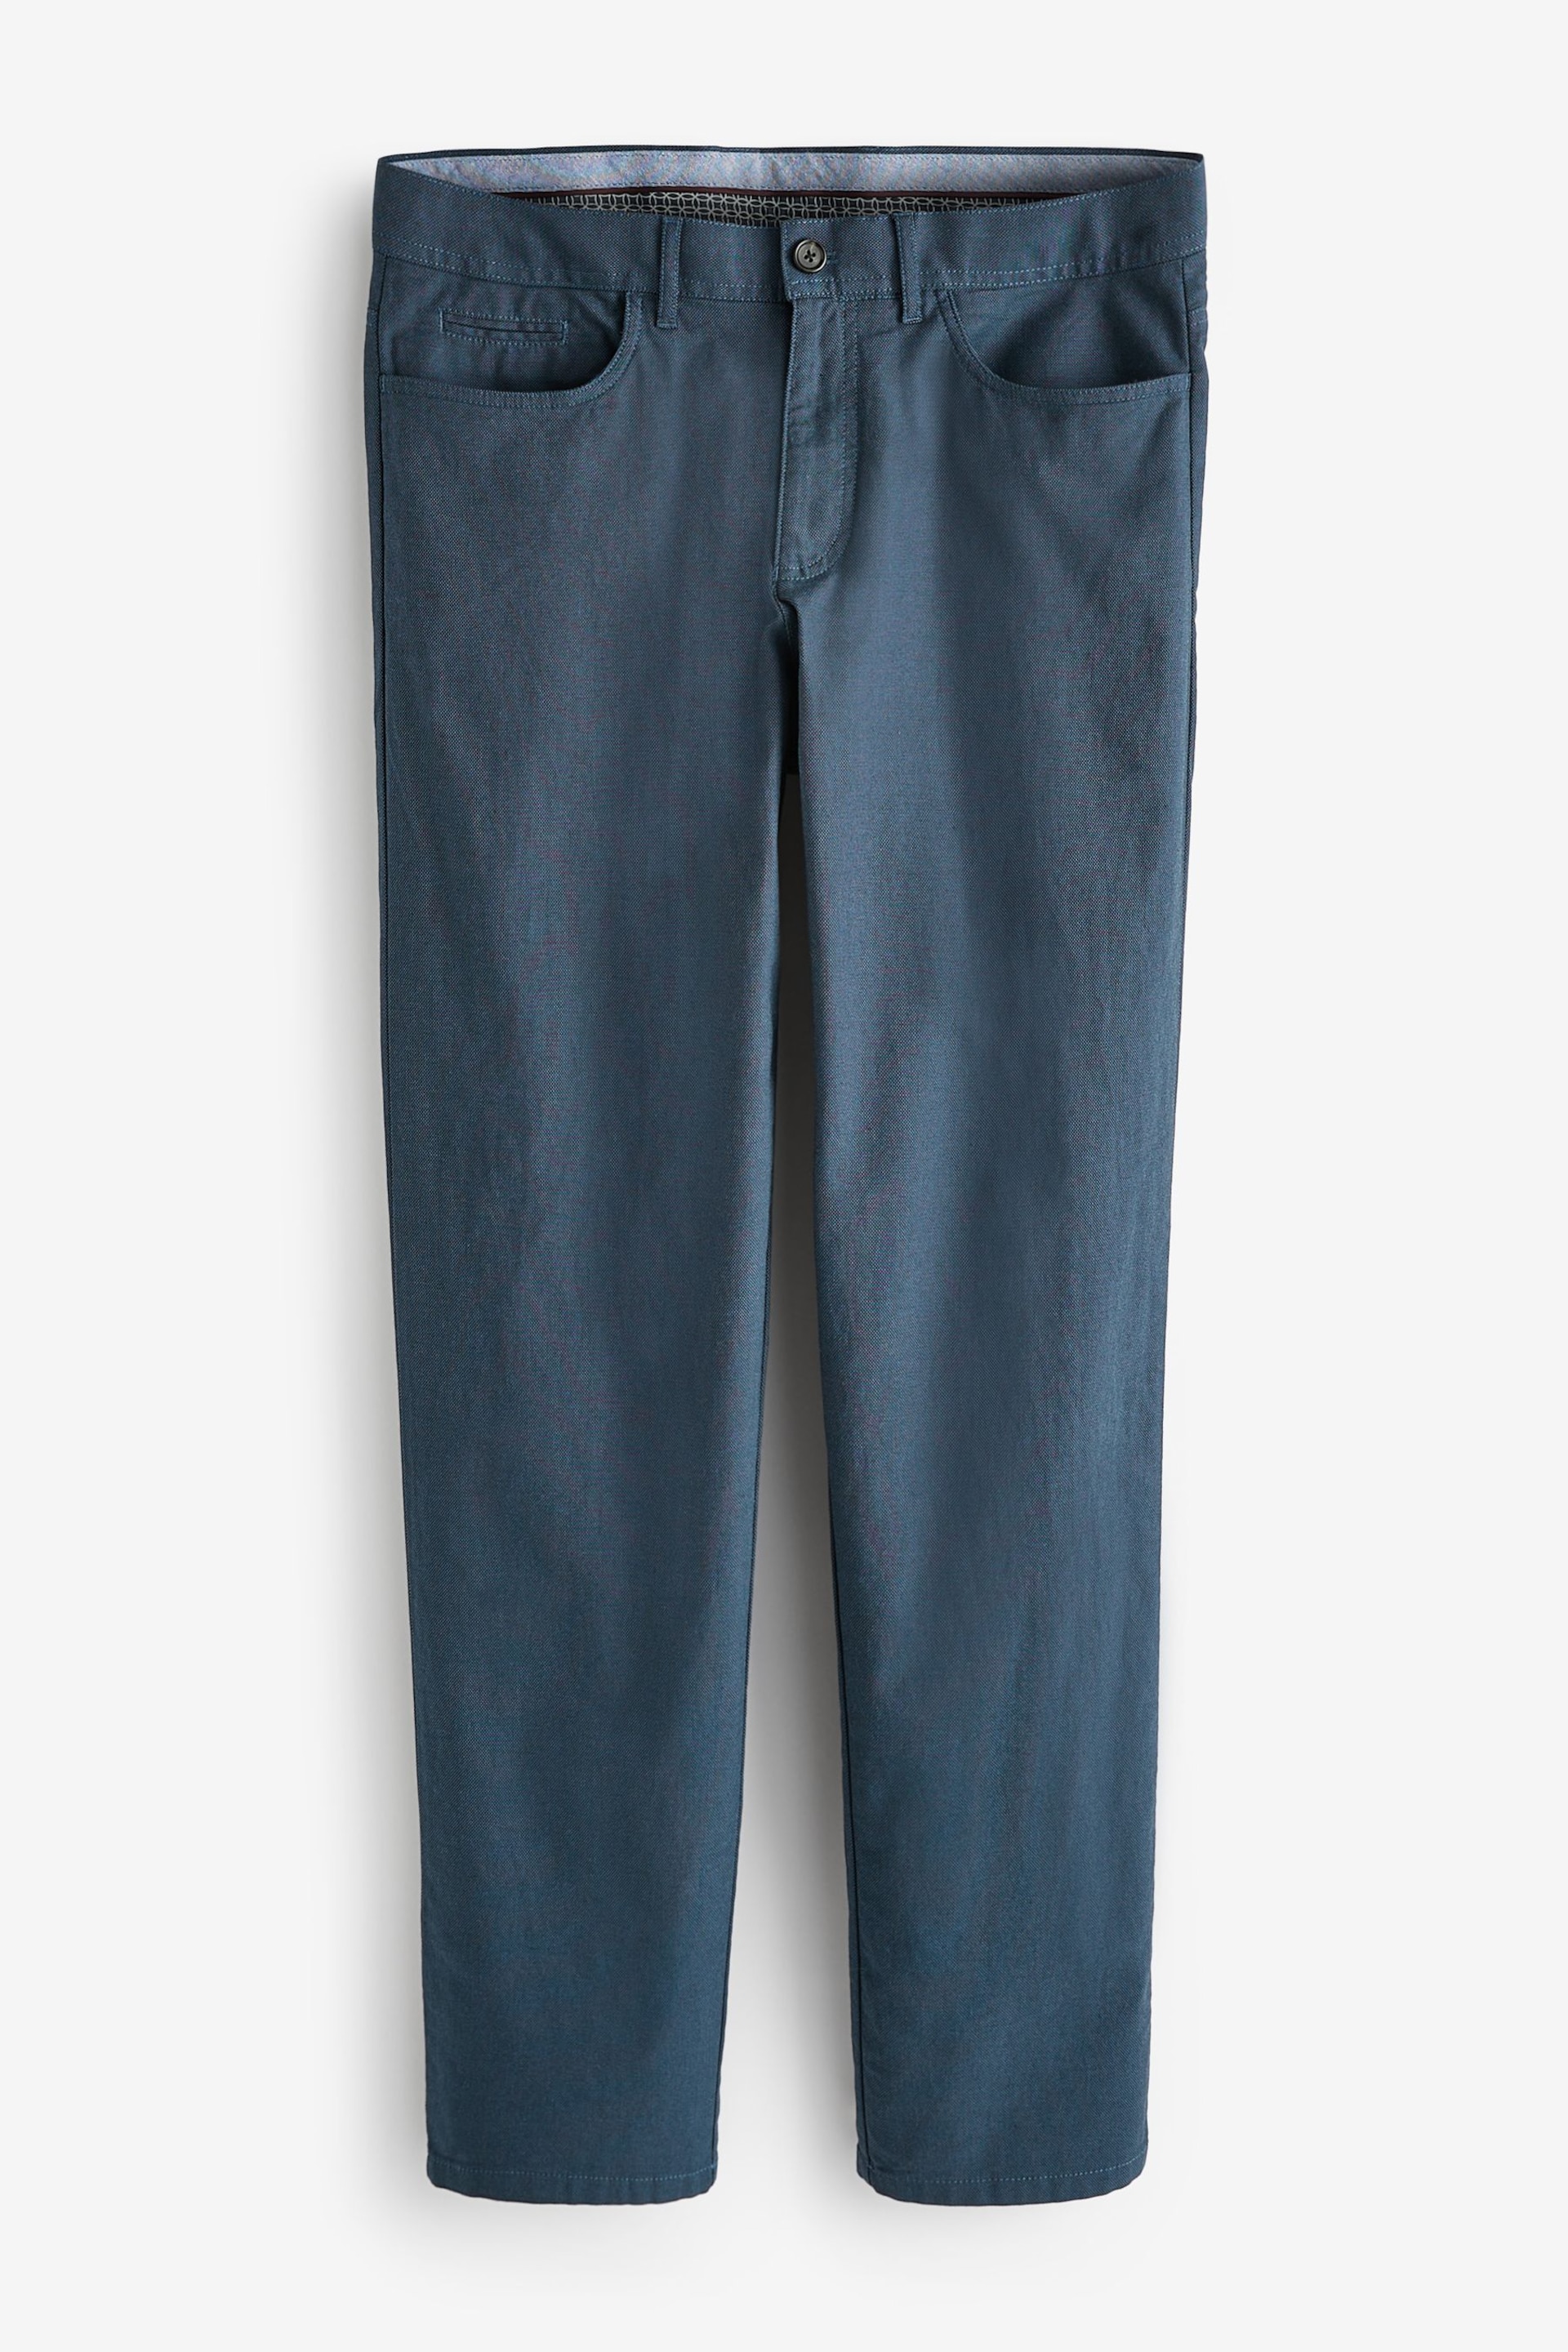 Blue 5 Pocket Smart Textured Chino Trousers - Image 5 of 8